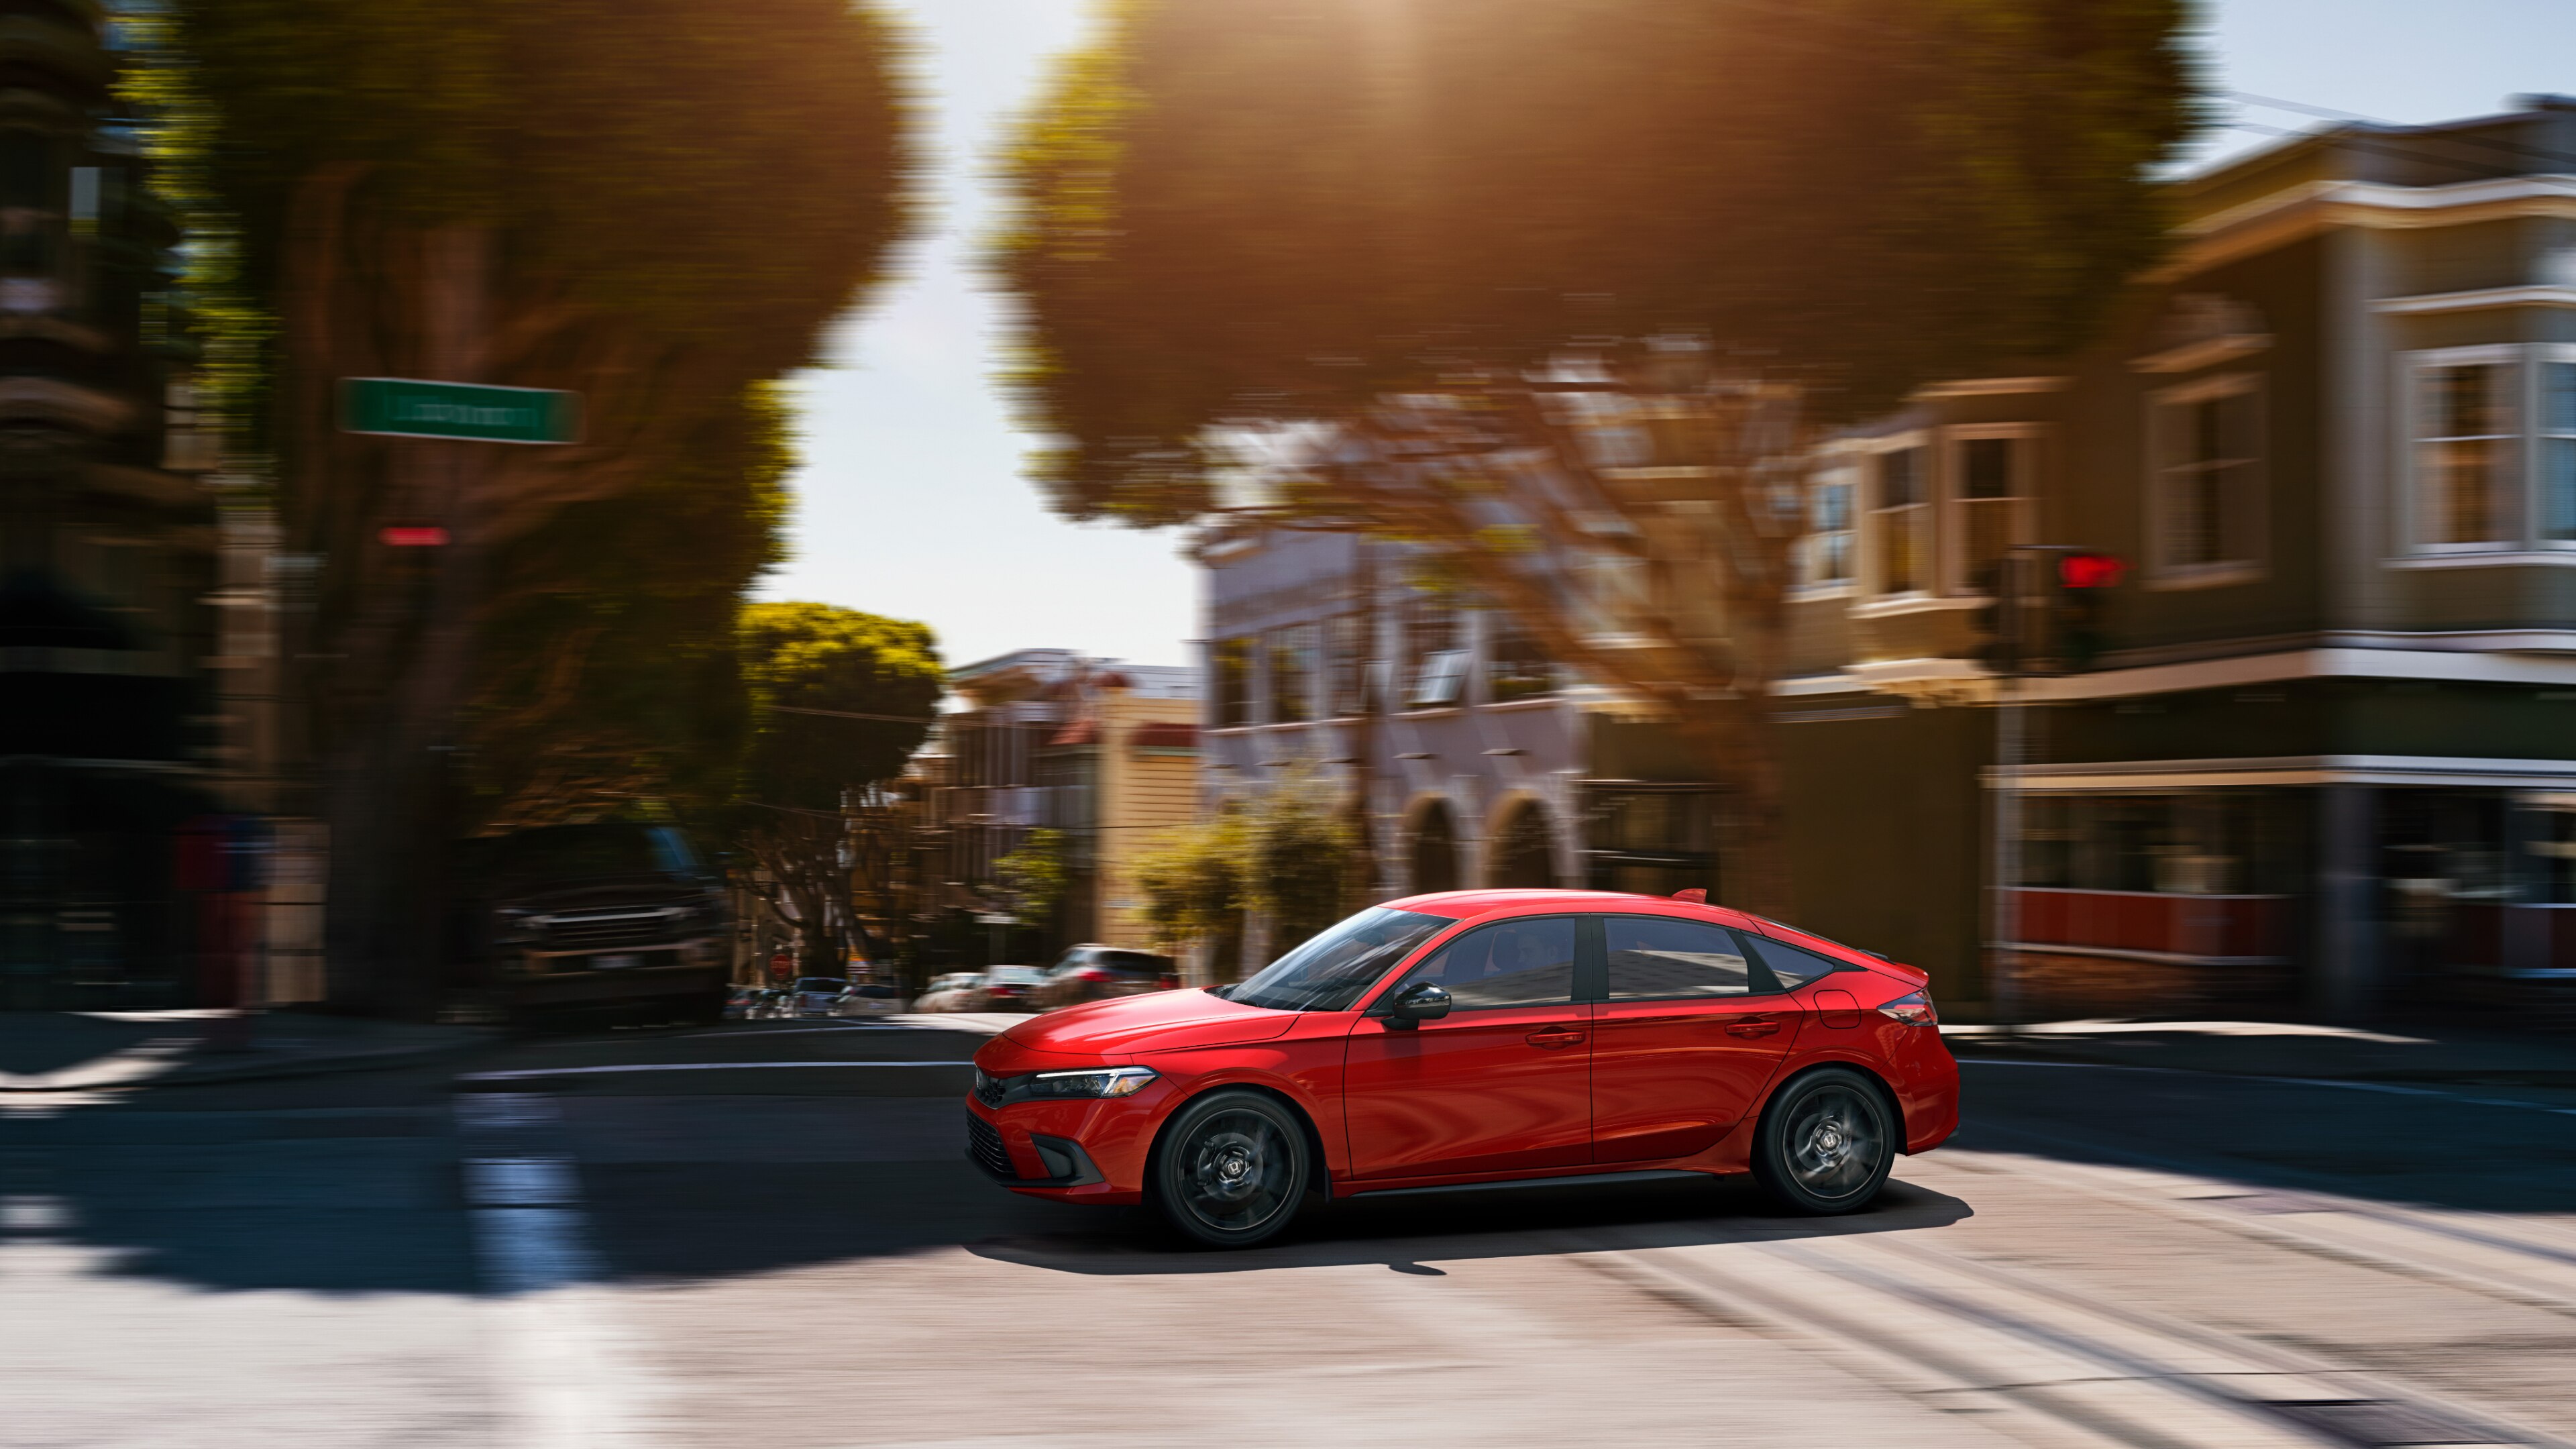 Side view of red Honda Civic Hatchback driving through an intersection with trees and houses in the background